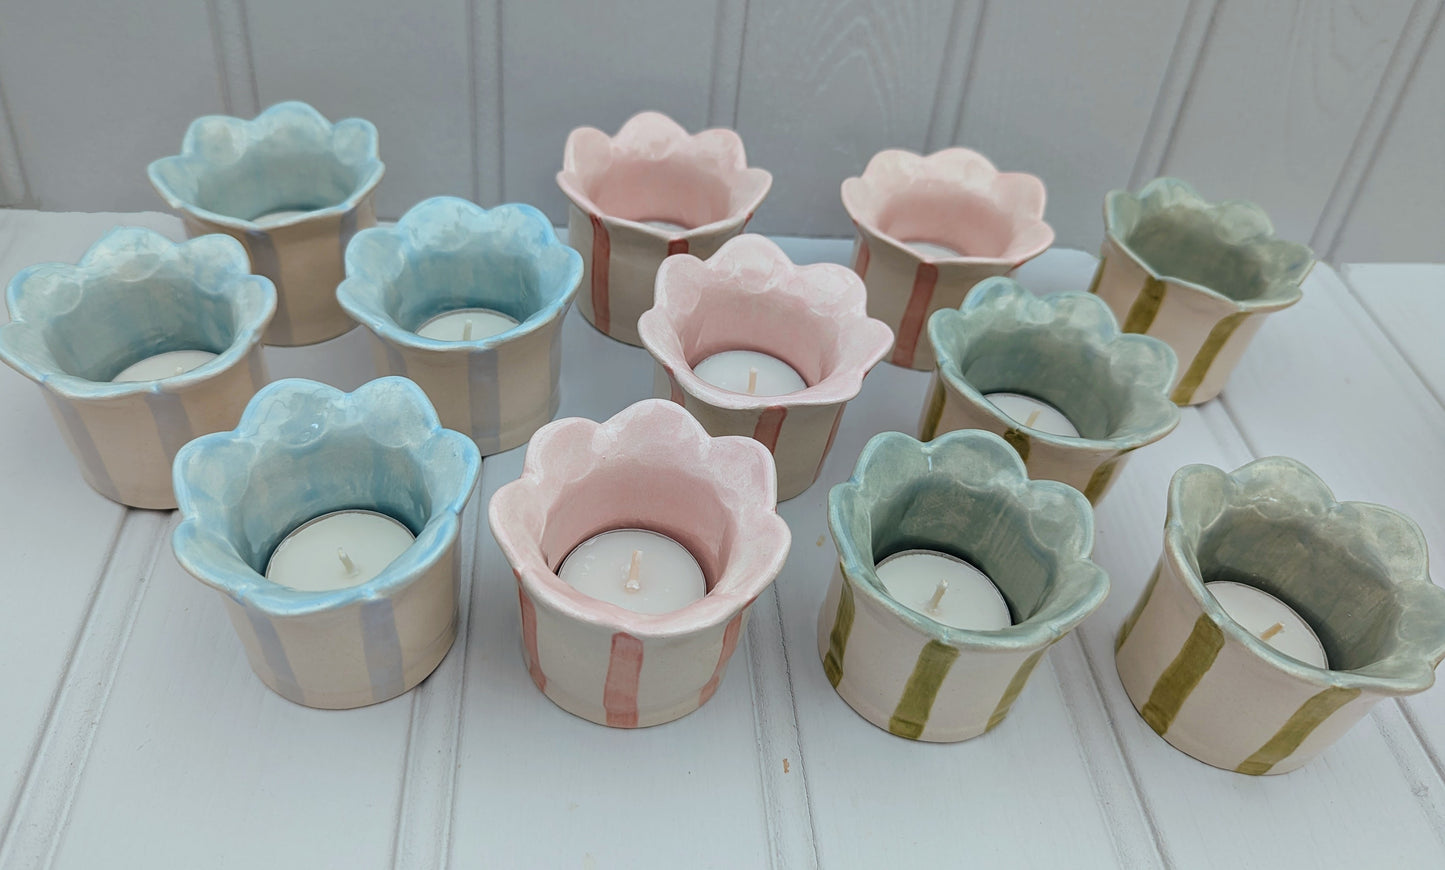 Sea Bramble Ceramics - Homemade Earthenware Striped and Scalloped tealight holders. Shown in Pink, Baby blue and Sage.